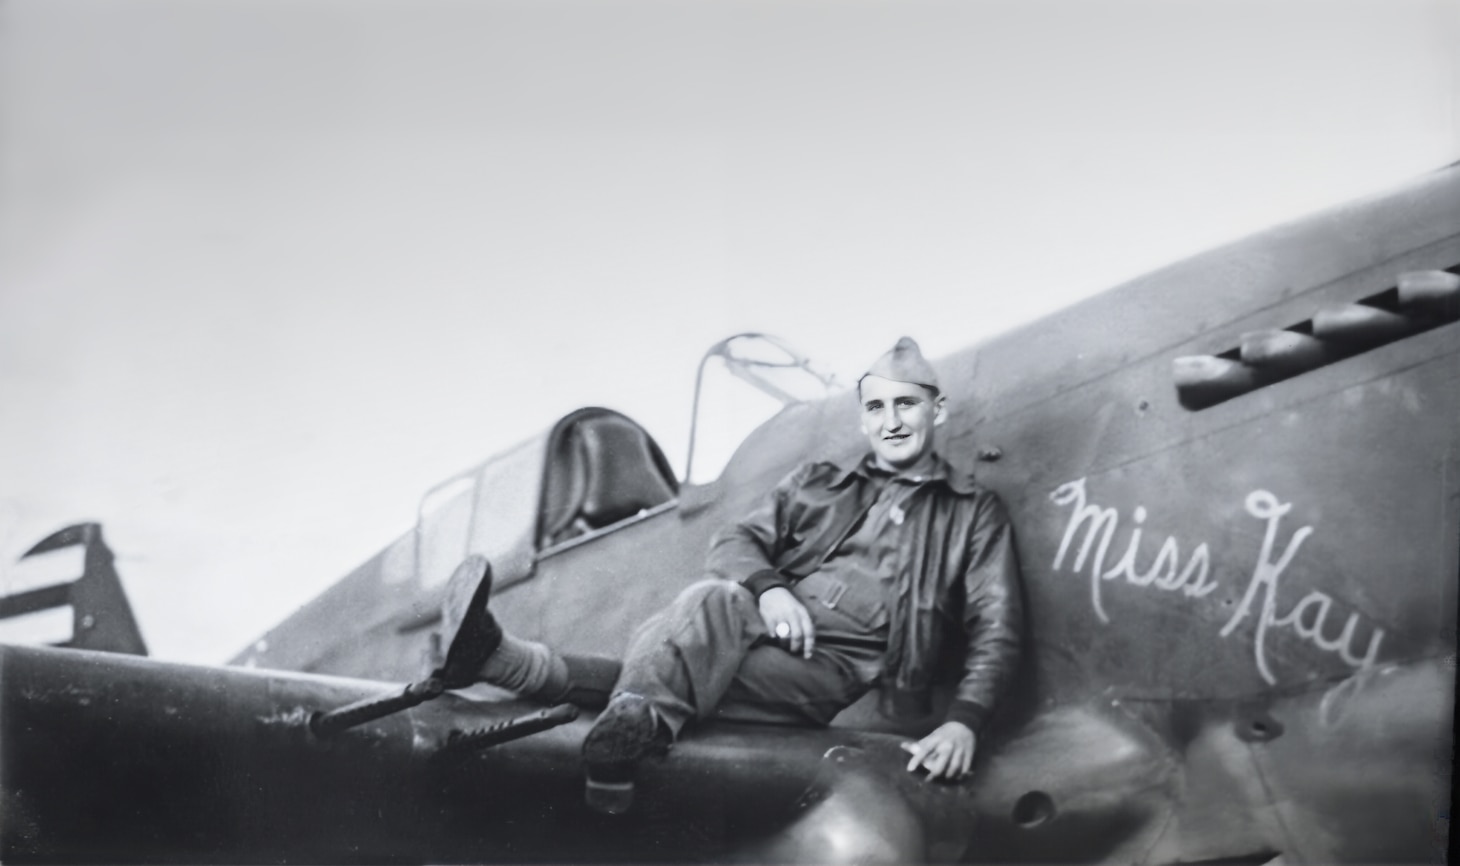 2nd Lt. Francis S. Gabreski of the 45th Pursuit Squadron, Wheeler Air Field, lounges on the wing root of a squadron P-40 named “Miss Kay.” Unable to find a ready-to-go P-40, he discovered a P-36A and took off after departing Japanese aircraft. Although he tried to reach the raiders’ altitude, they were gone by that time. His career in Europe, and later in Korea, flying F-86A Sabres, gaining 6.5 kills over Communist MiG-15s, gave him a total of 34.5 kills in two wars. He retired in 1967 as a colonel.